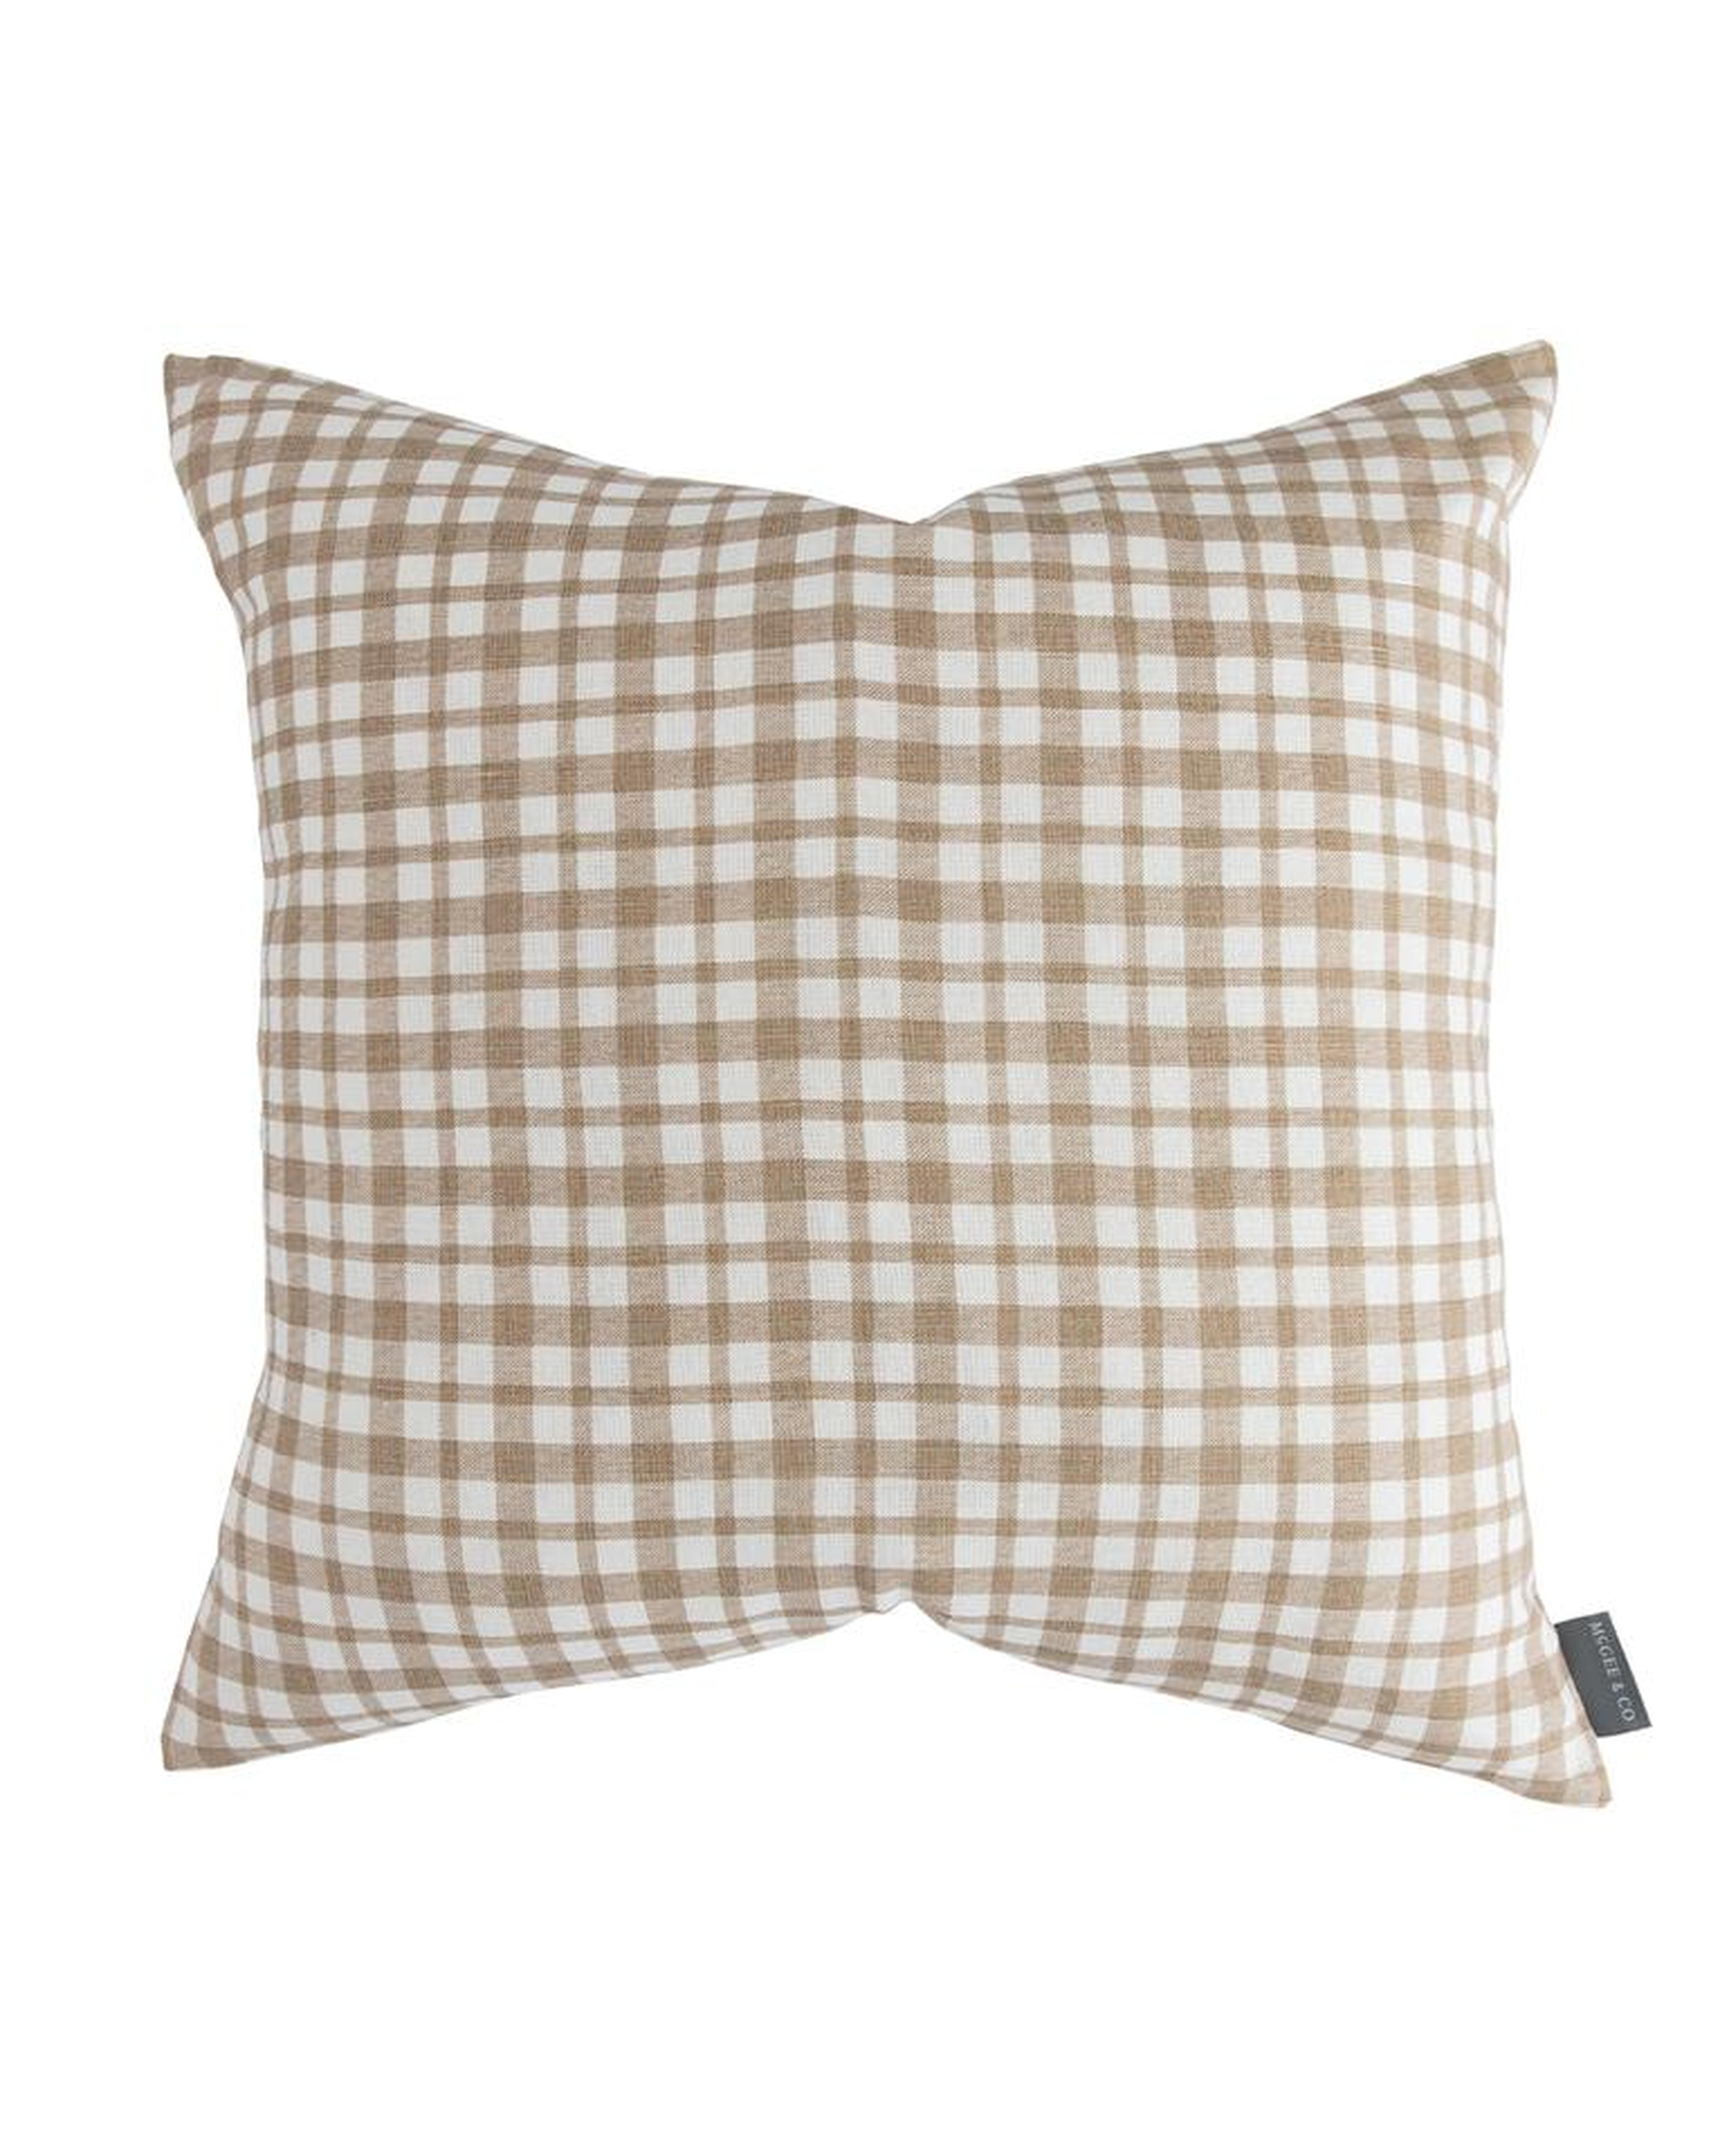 EDISON GINGHAM PILLOW COVER - McGee & Co.